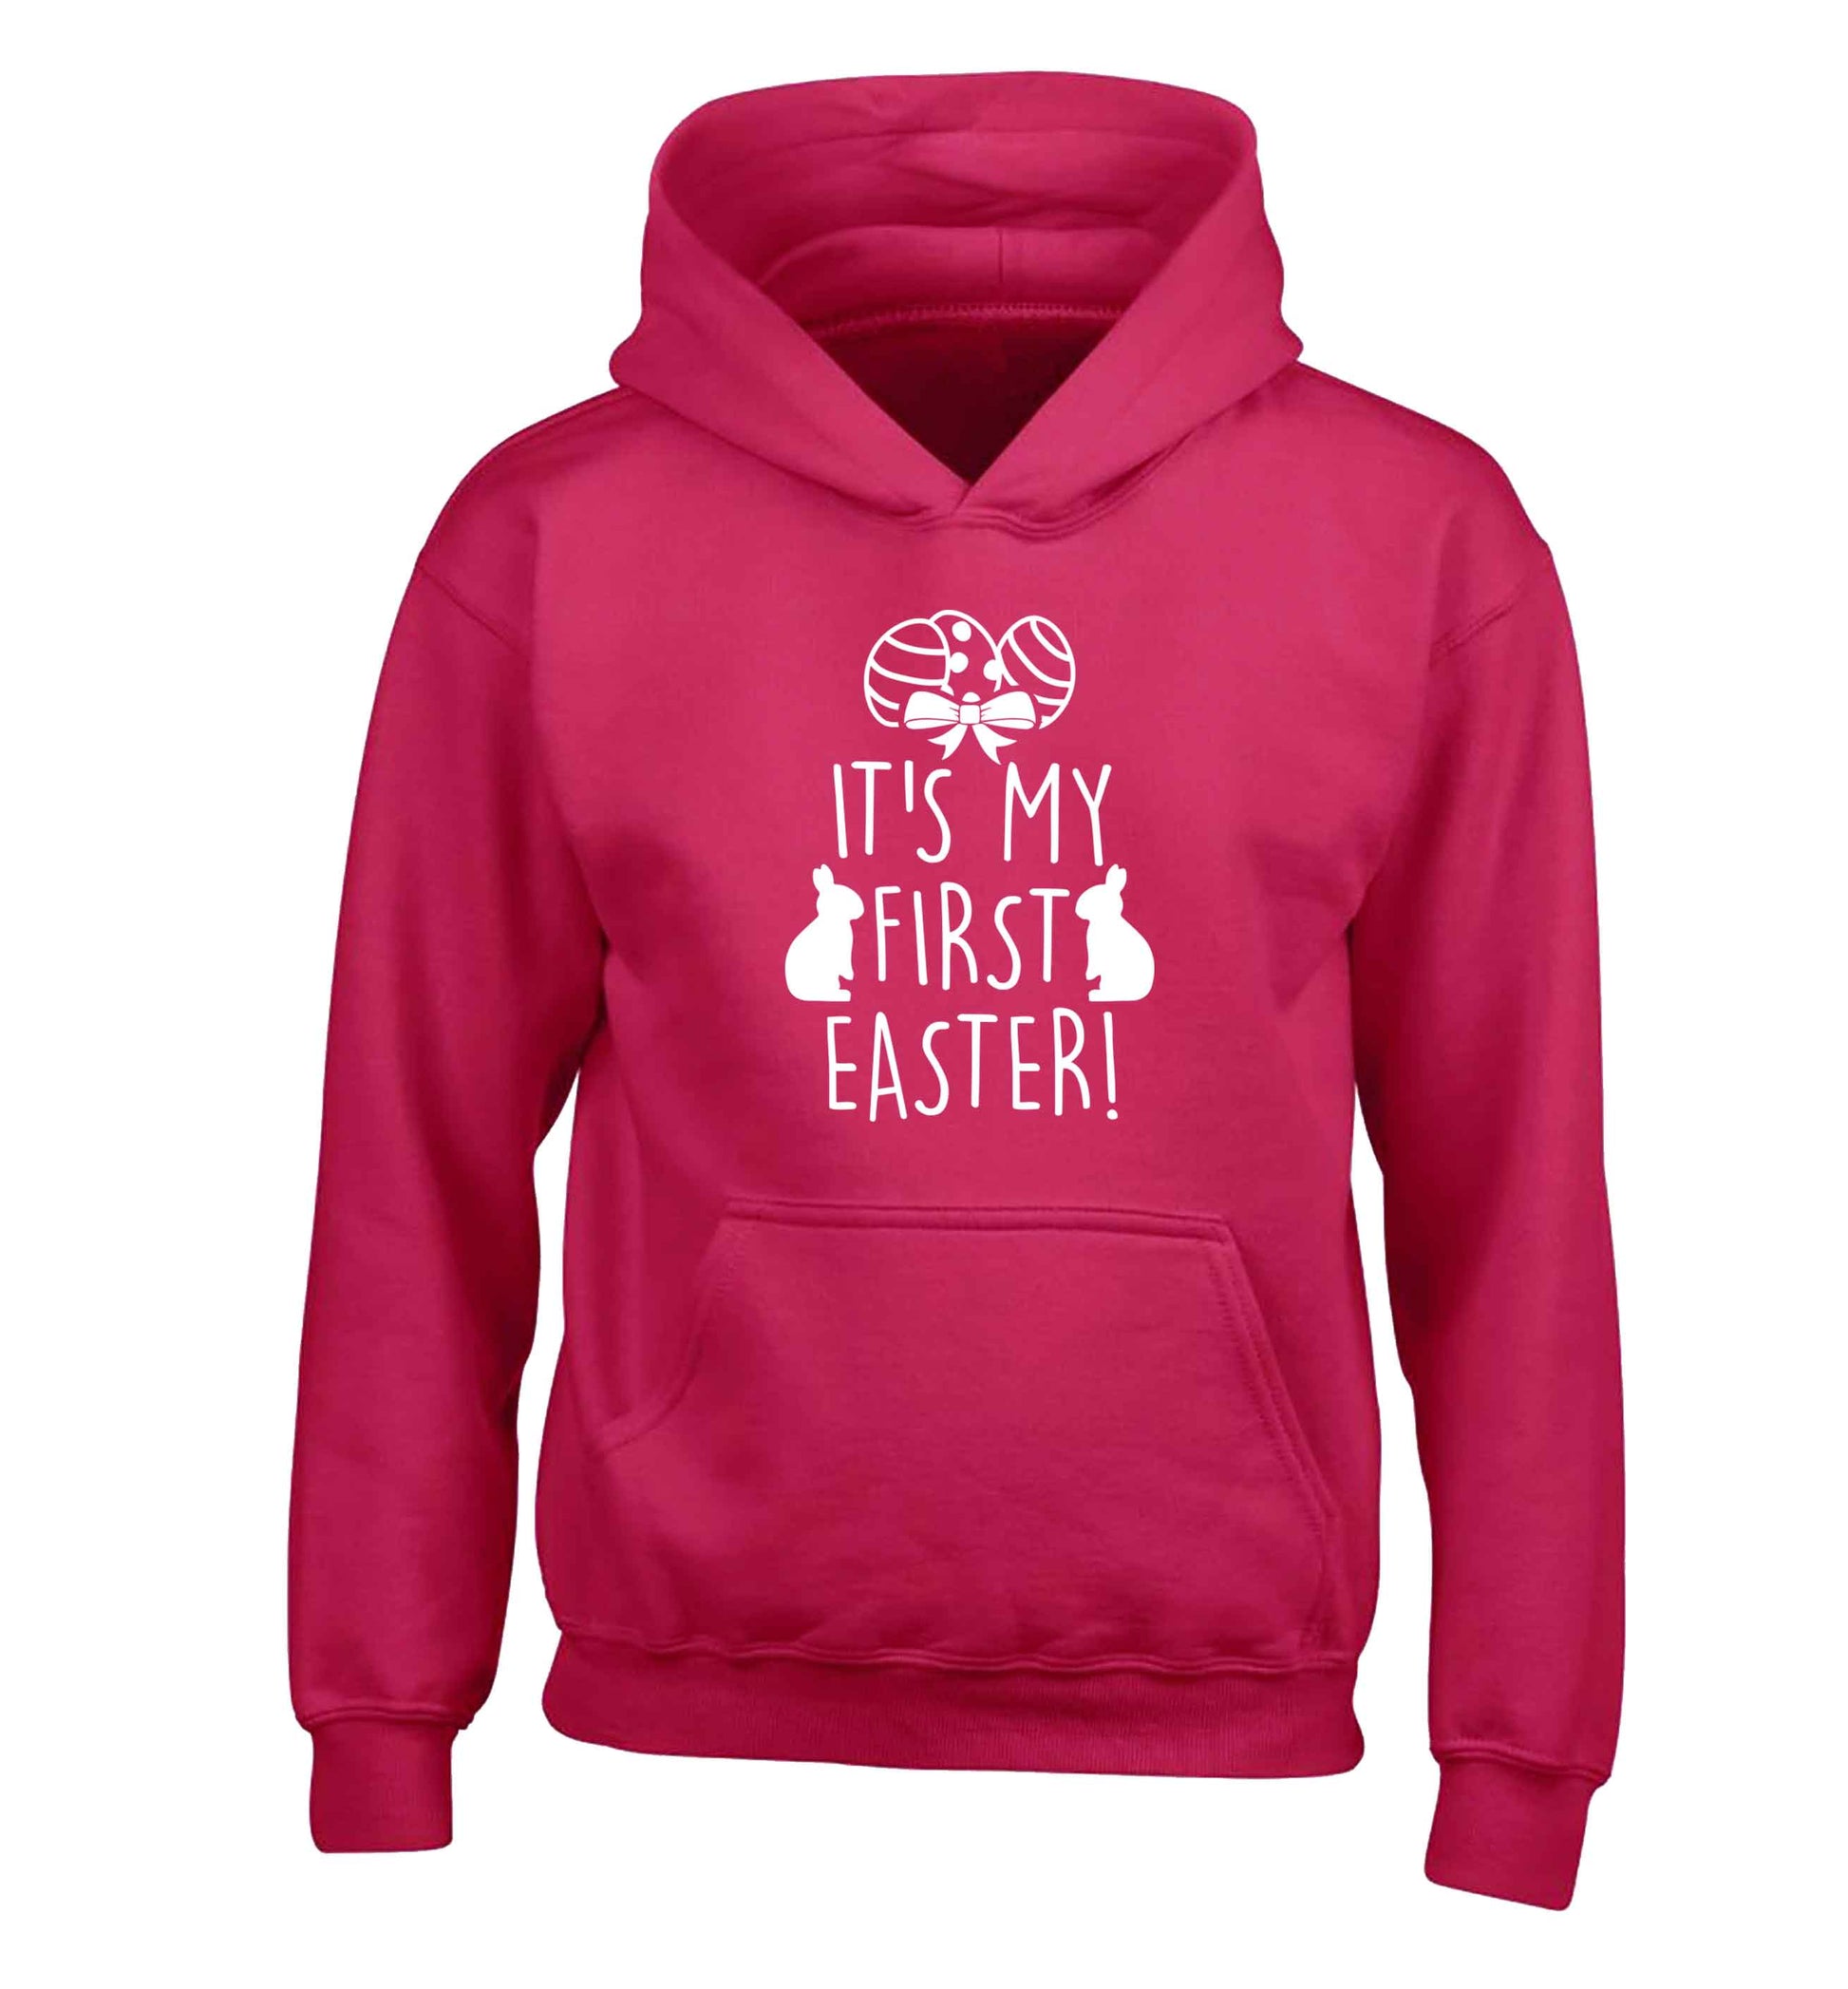 It's my first Easter children's pink hoodie 12-13 Years